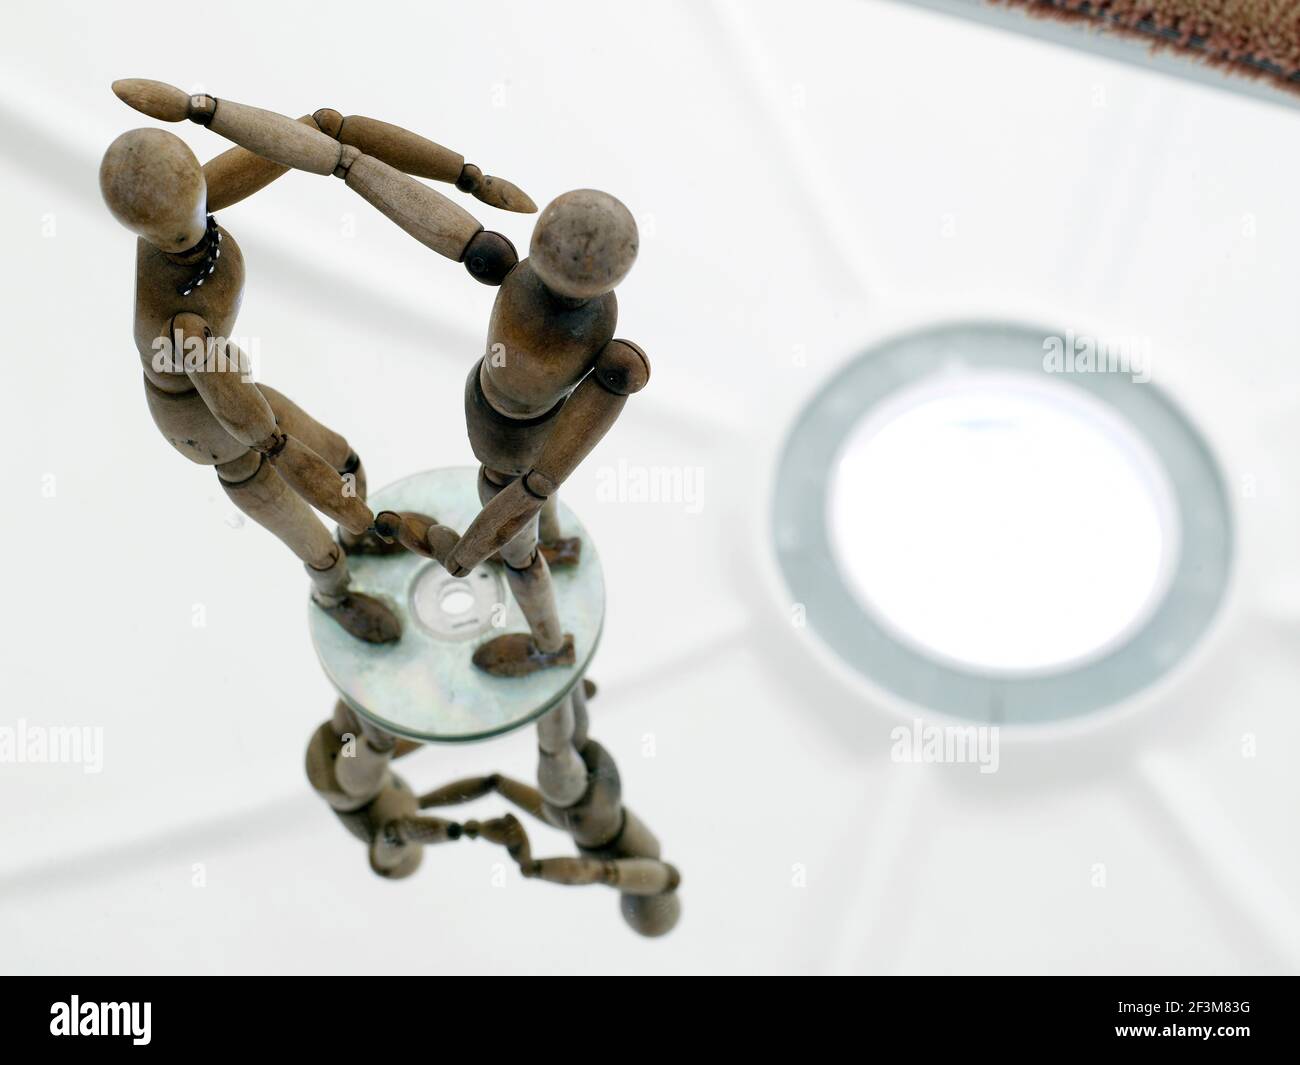 Close up of two wooden figures on table with mirrored surface in residential house, Brazil Stock Photo